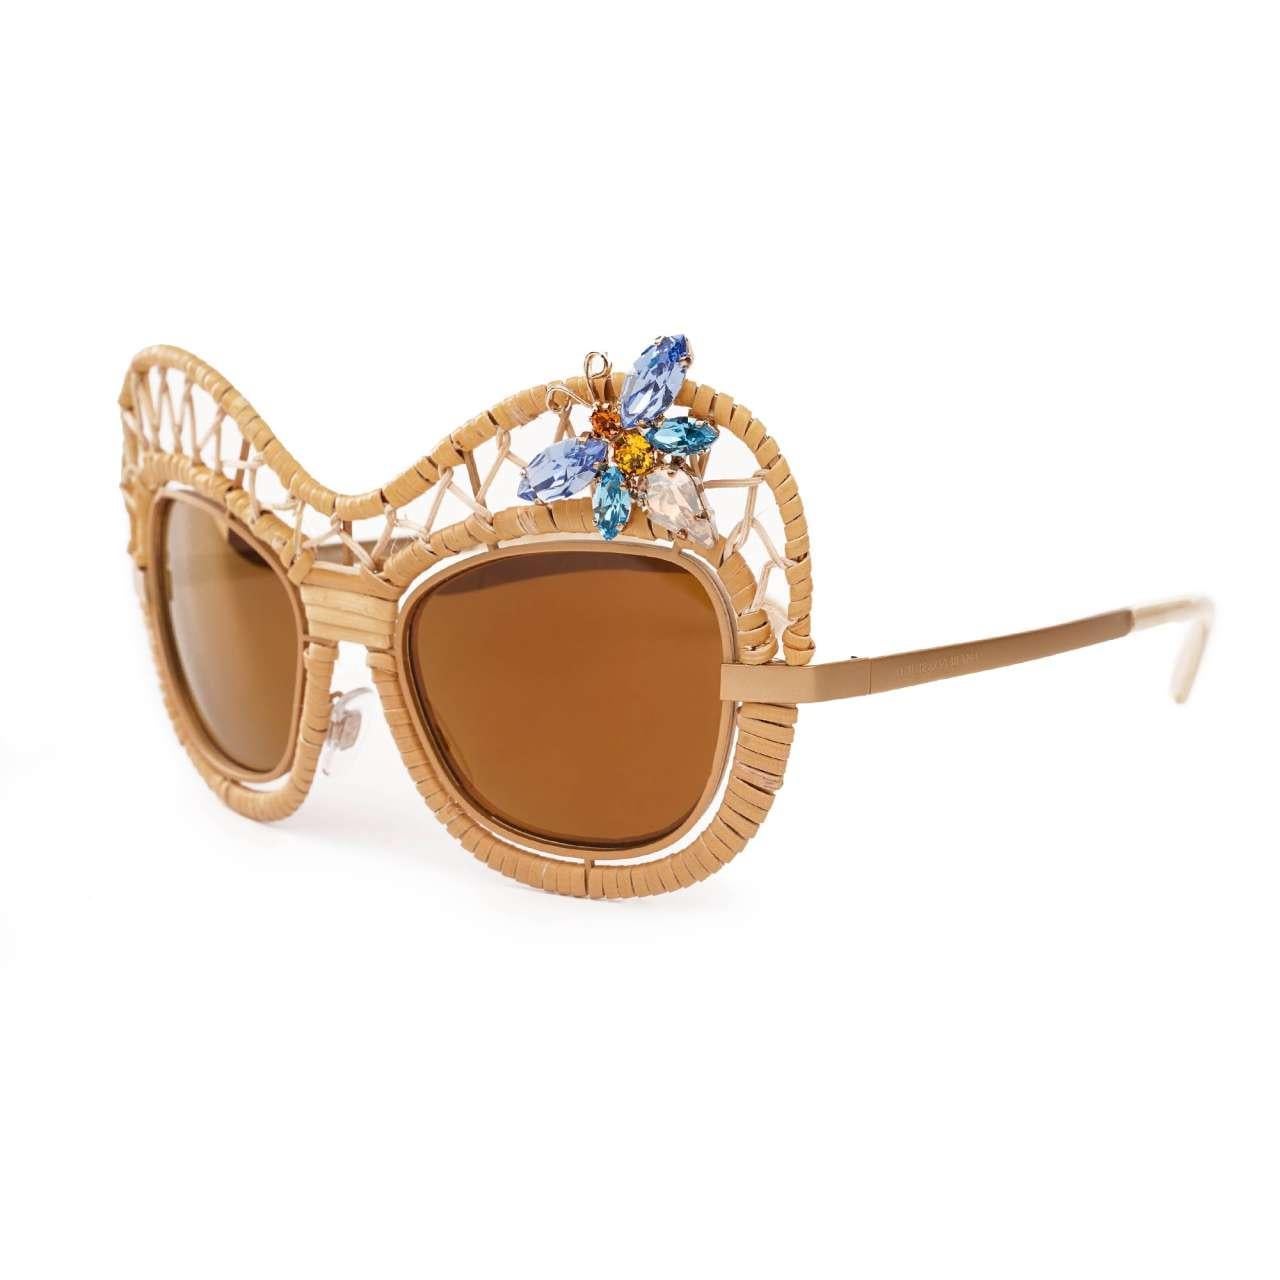 -Â Special Edition Butterfly SunglassesÂ  DG2159-B embellished with hand woven straw and crystal butterfly by DOLCE & GABBANA - MADE IN ITALY - Former RRP: EUR 2.500 - New with Case and Box - Model: VG2159-B - Color Frame: Beige / Gold - Color